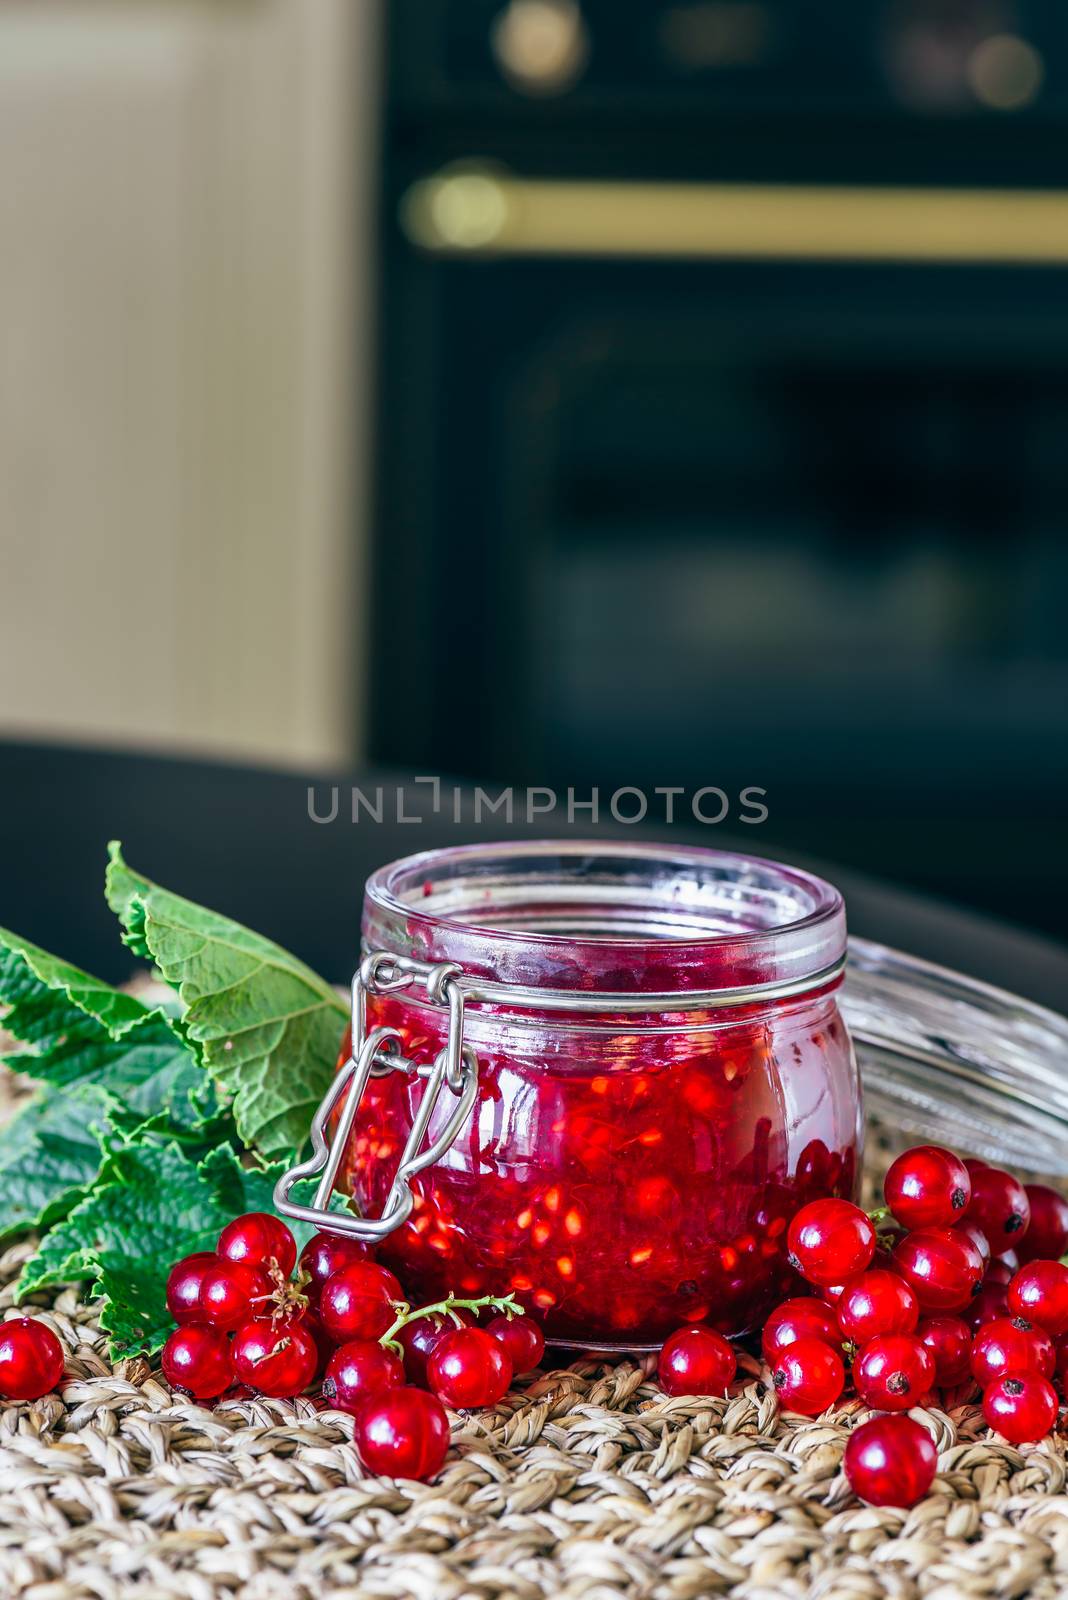 Homemade Jam in Glass Jar with Raw Red Currant and Leaves.